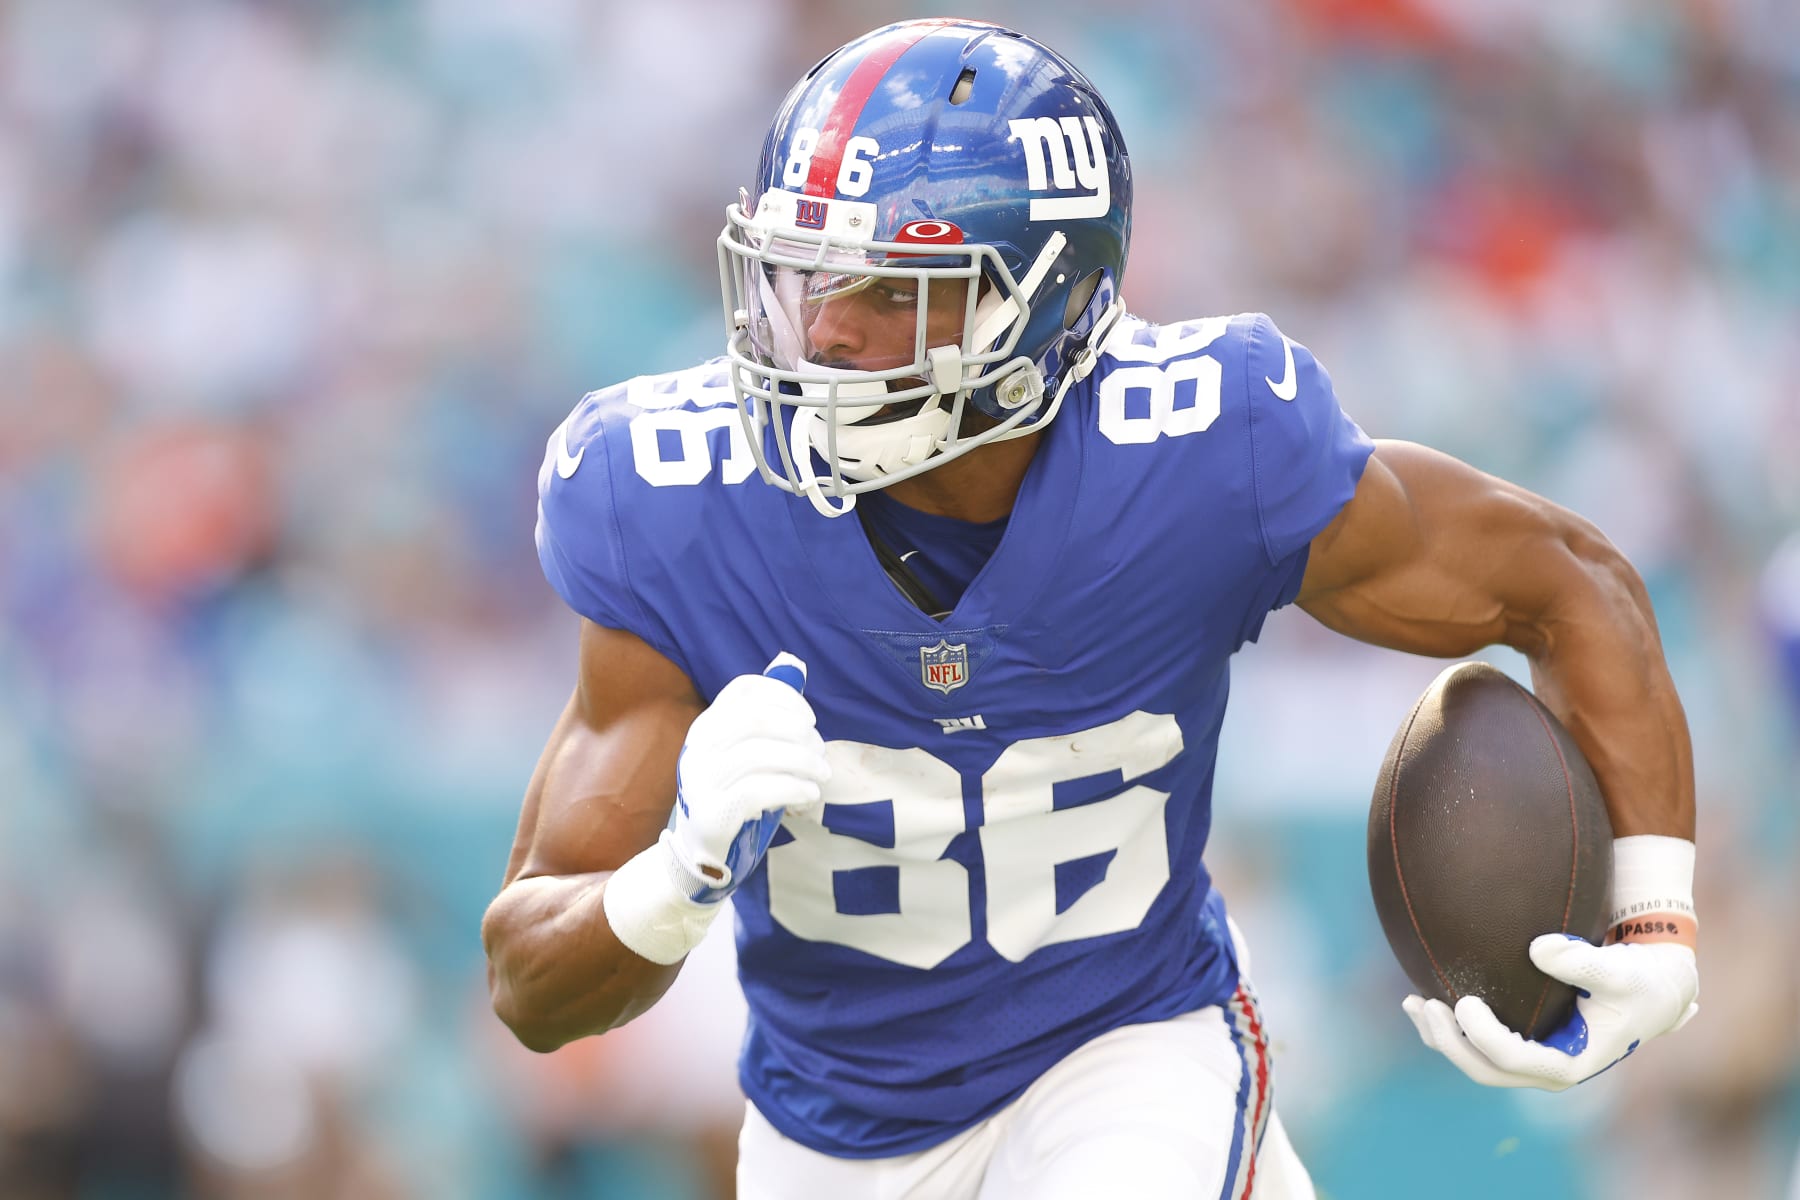 New York Giants final 53-man roster projection for 2022 - Could depth  concerns, preseason injuries trigger more moves? - ESPN